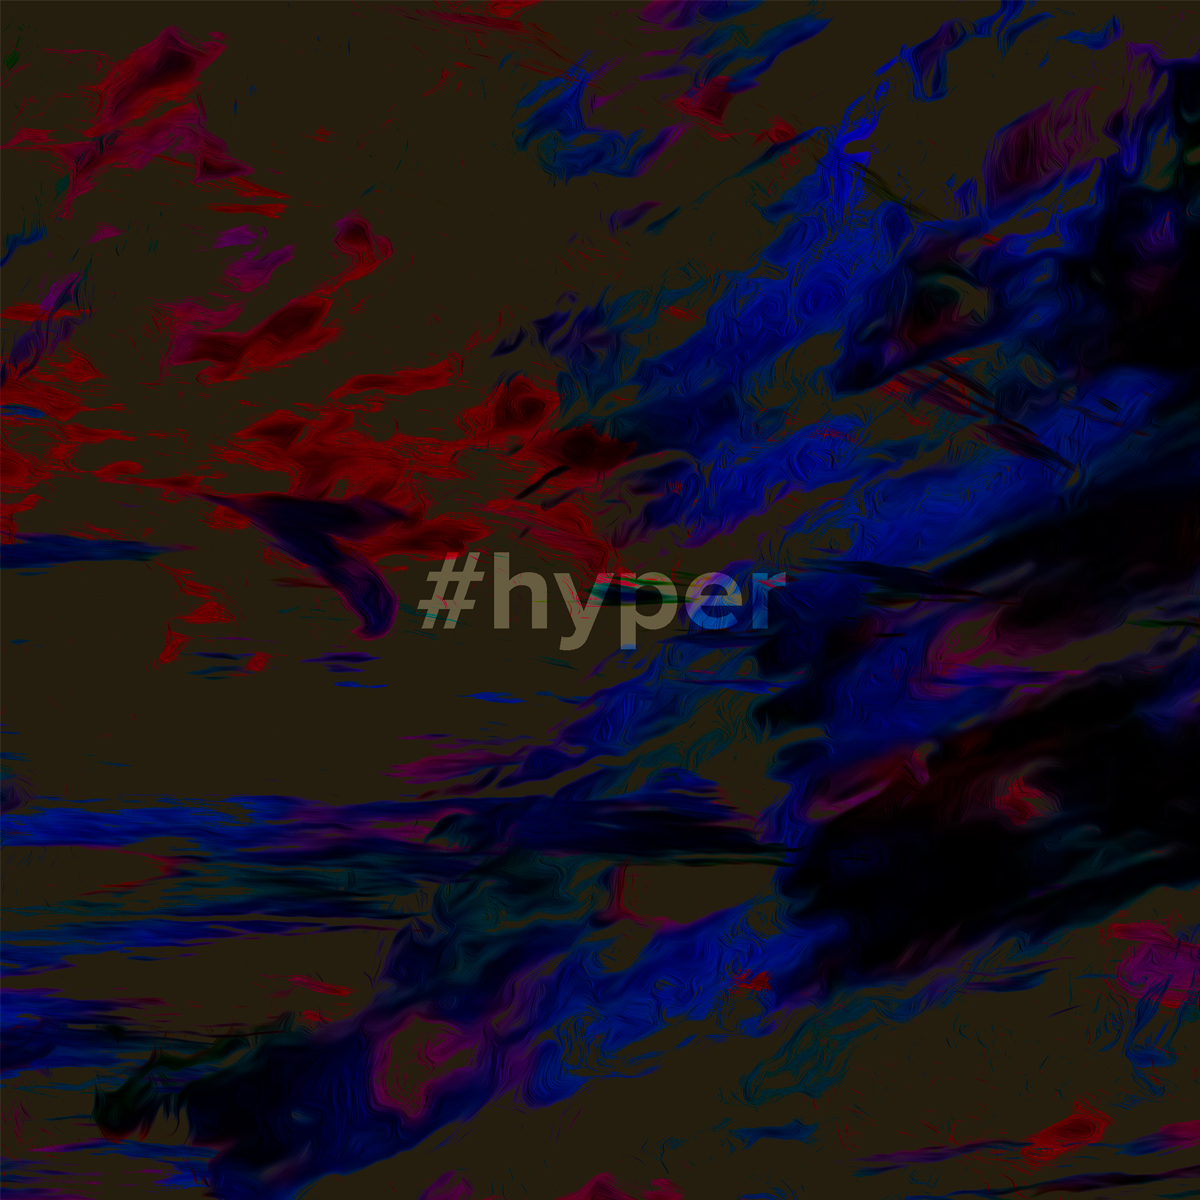 A black square with red and blue digital paint splatters over it. Beneath the splatters is the word "#hyper" in white.